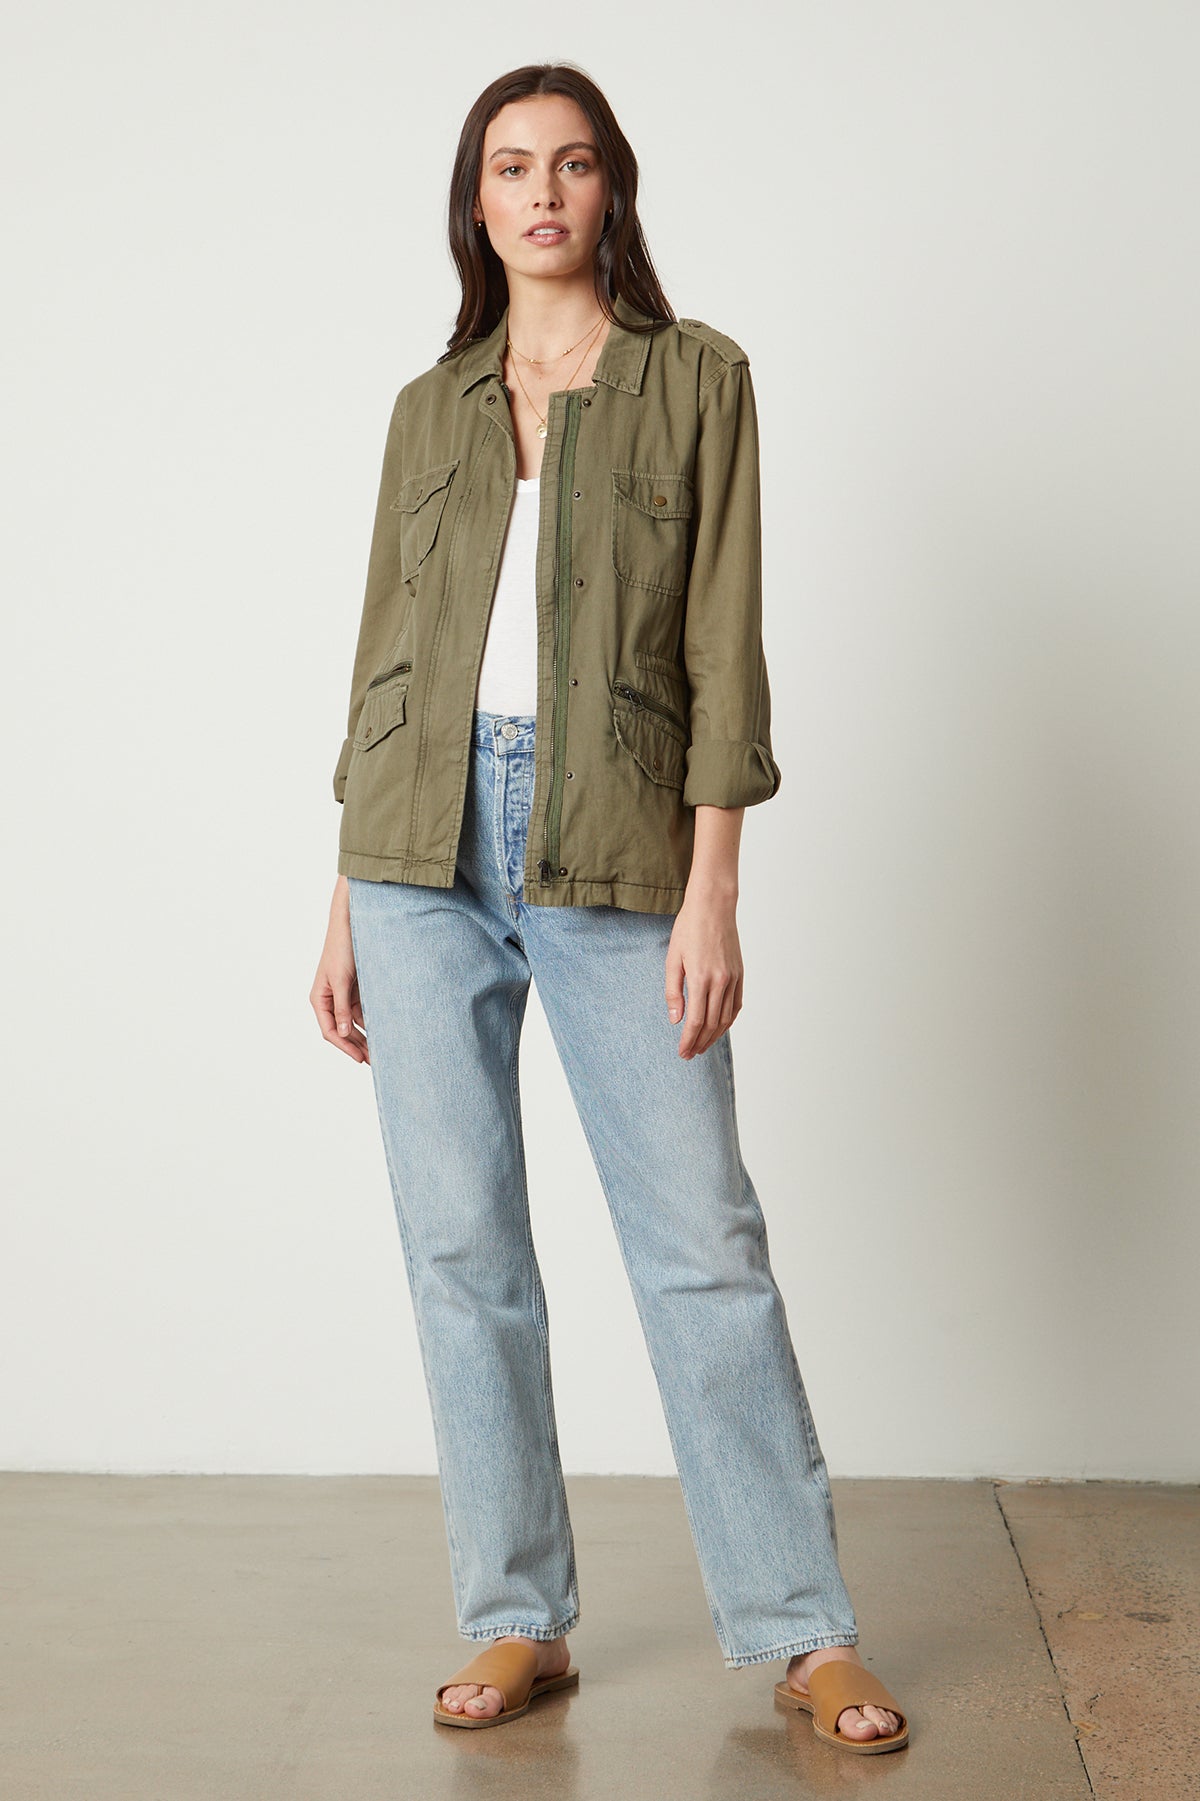   RUBY LIGHT-WEIGHT ARMY JACKET 